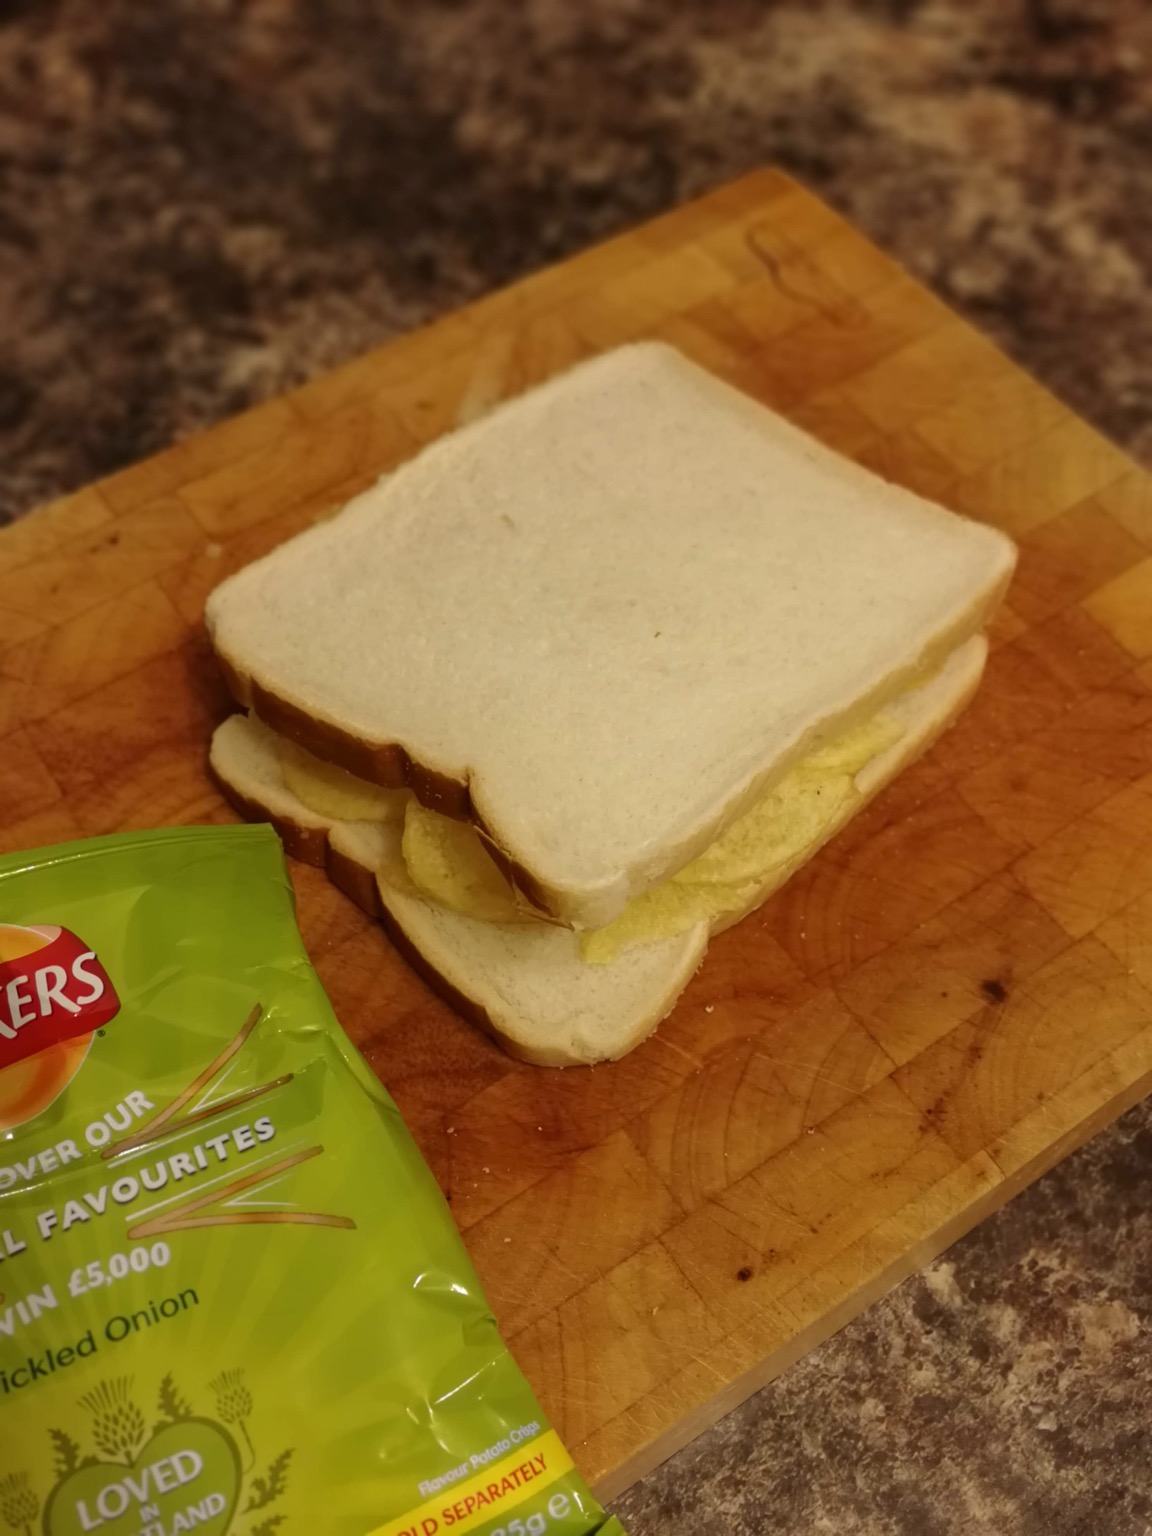 White crisp sandwich on a chopping board with bag